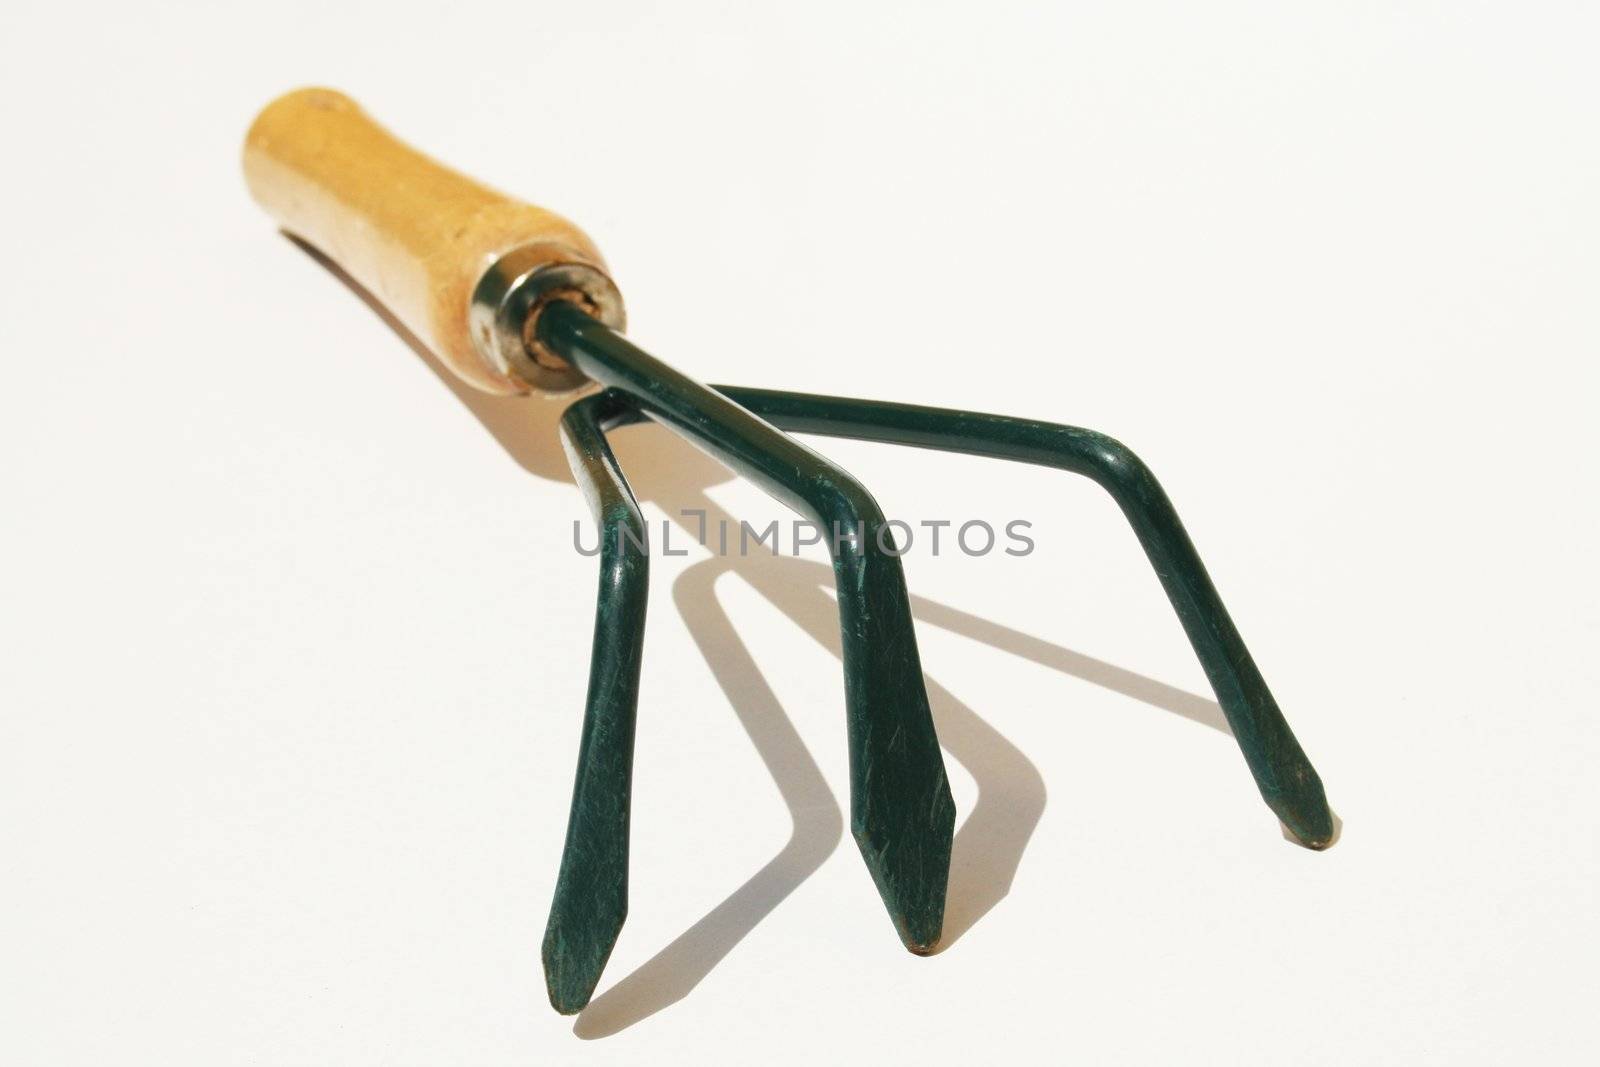 Hand cultivator fork tool against white background